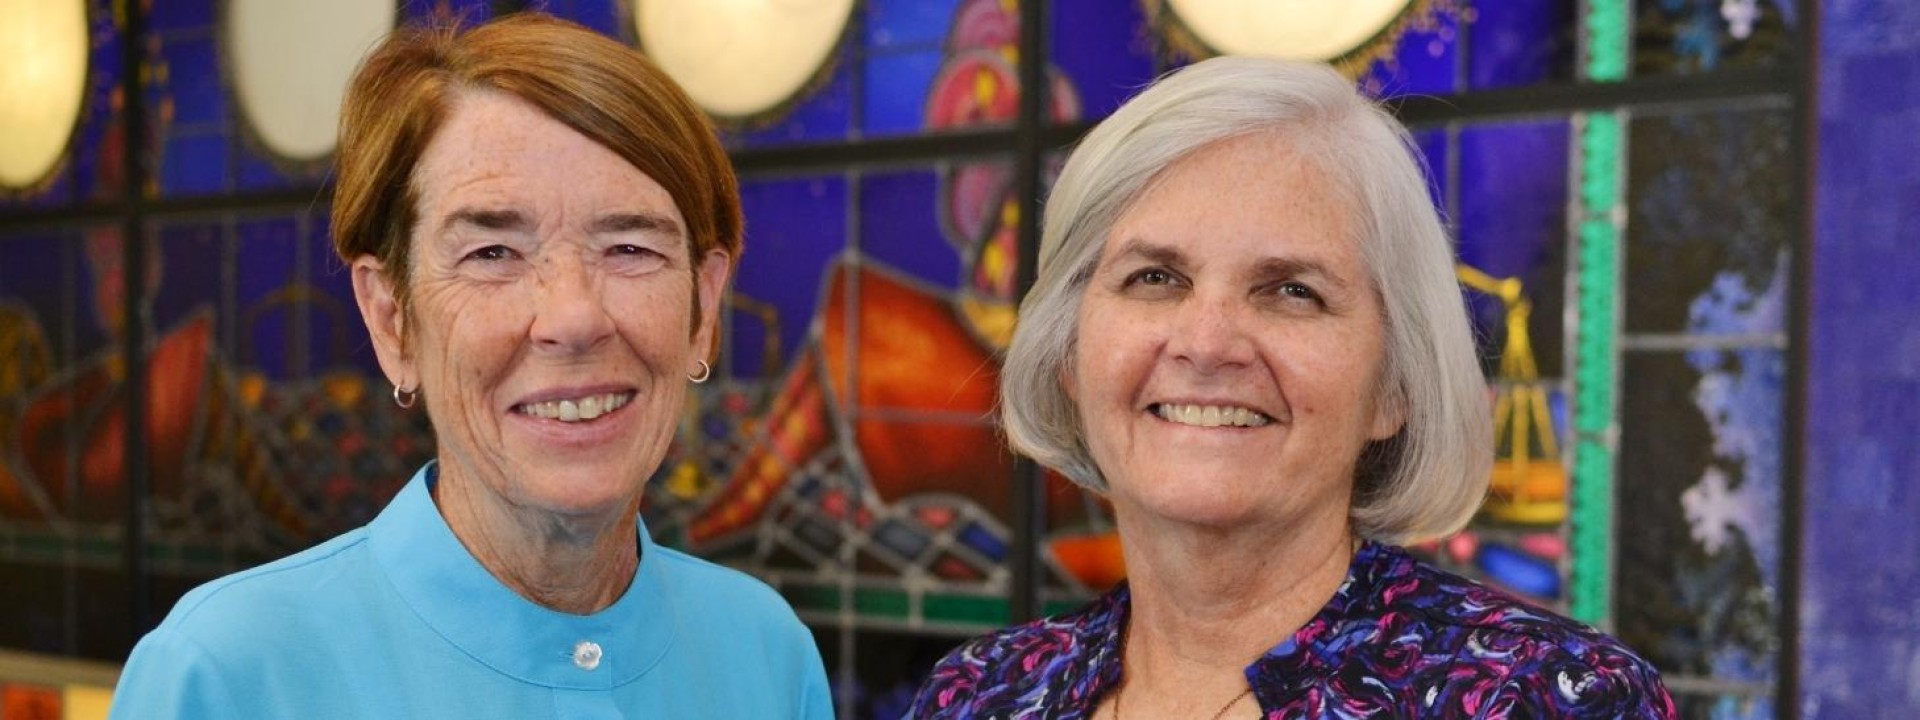 Two smiling women Sister Mary Scullion and Joan McConnon